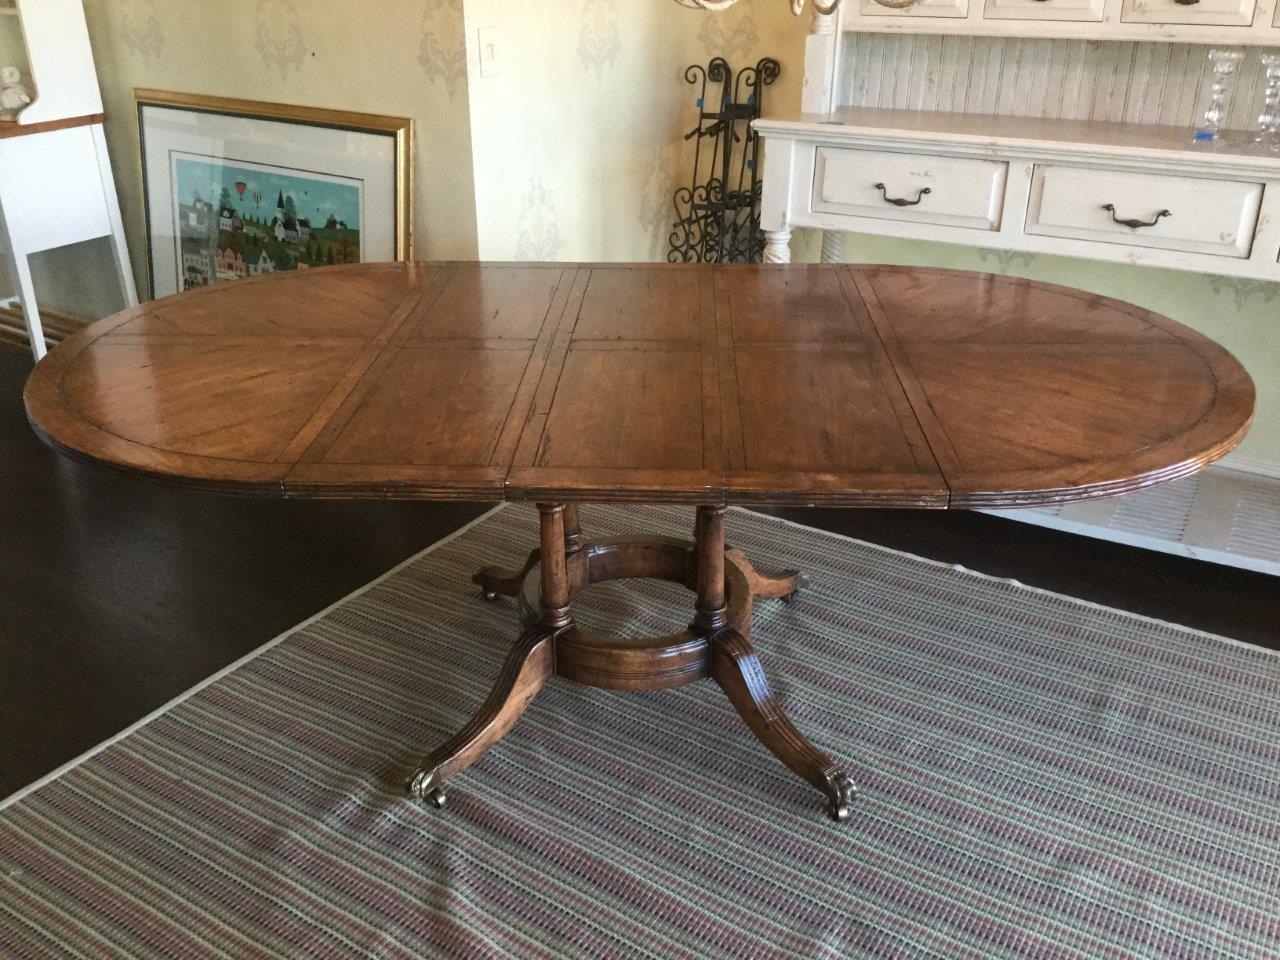 Beautiful high quality dining table with a great patina. Without the 3 leaves, it’s a 48 inch round table on a pedestal base. With the leaves, each measuring 12 inches, this table extends to 84 inches. Made of aged cherry wood, you will love the